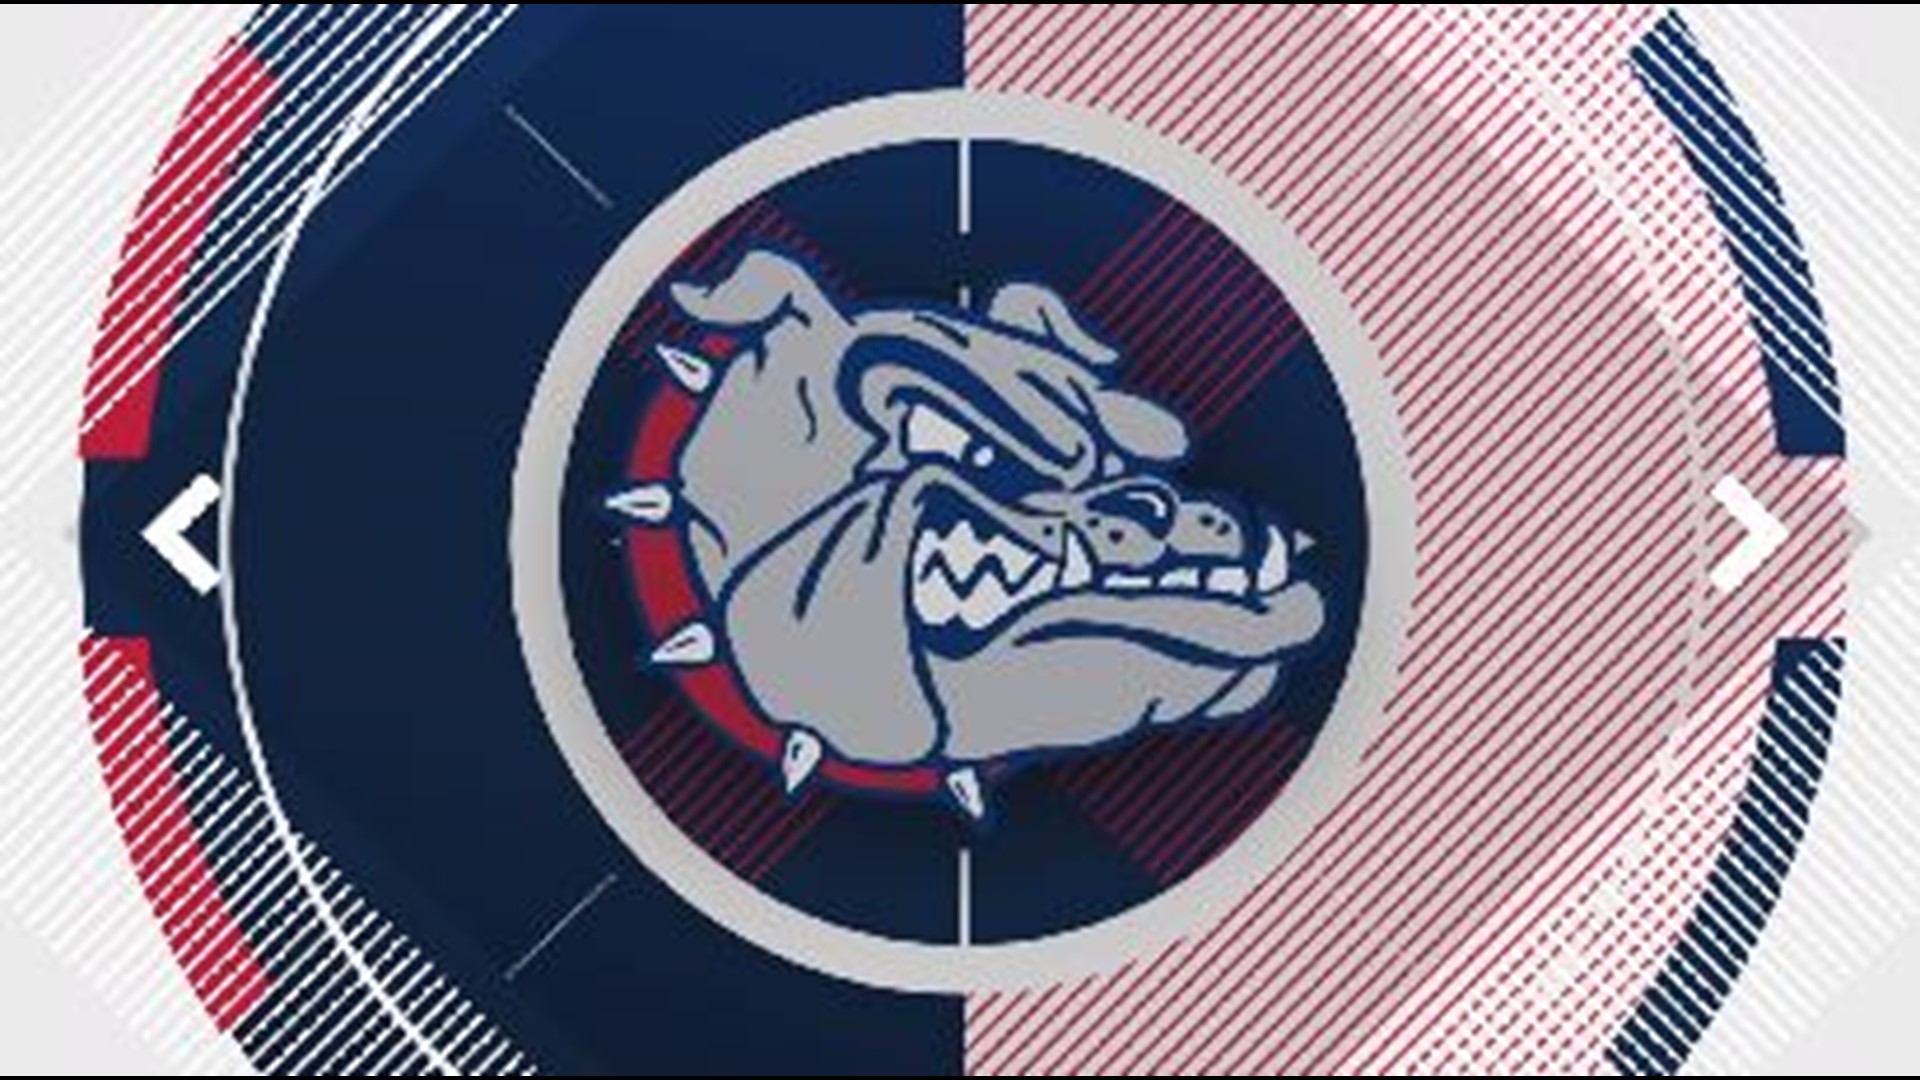 Gonzaga travels to the Battle 4 Atlantis in the Bahamas, where they face Southern Mississippi in the first round on Wednesday.